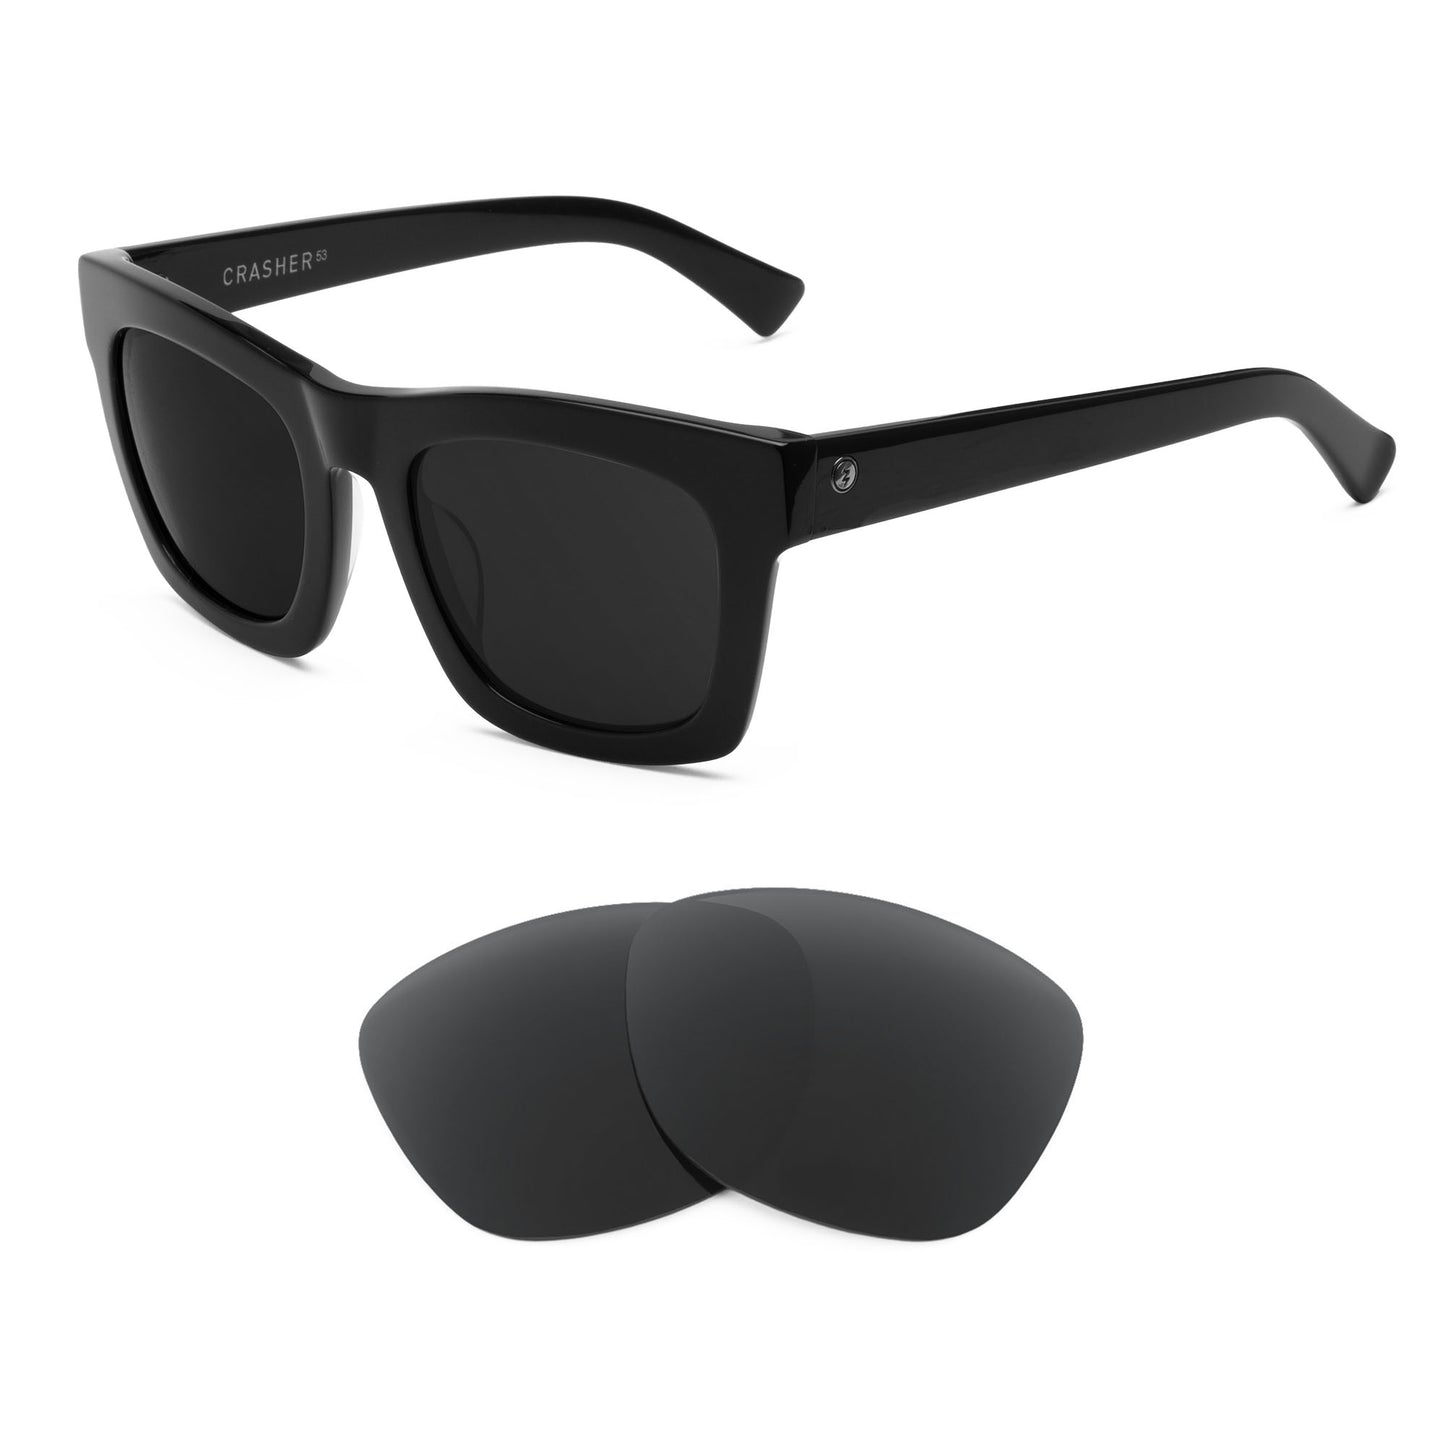 Electric Crasher 53mm (L) sunglasses with replacement lenses